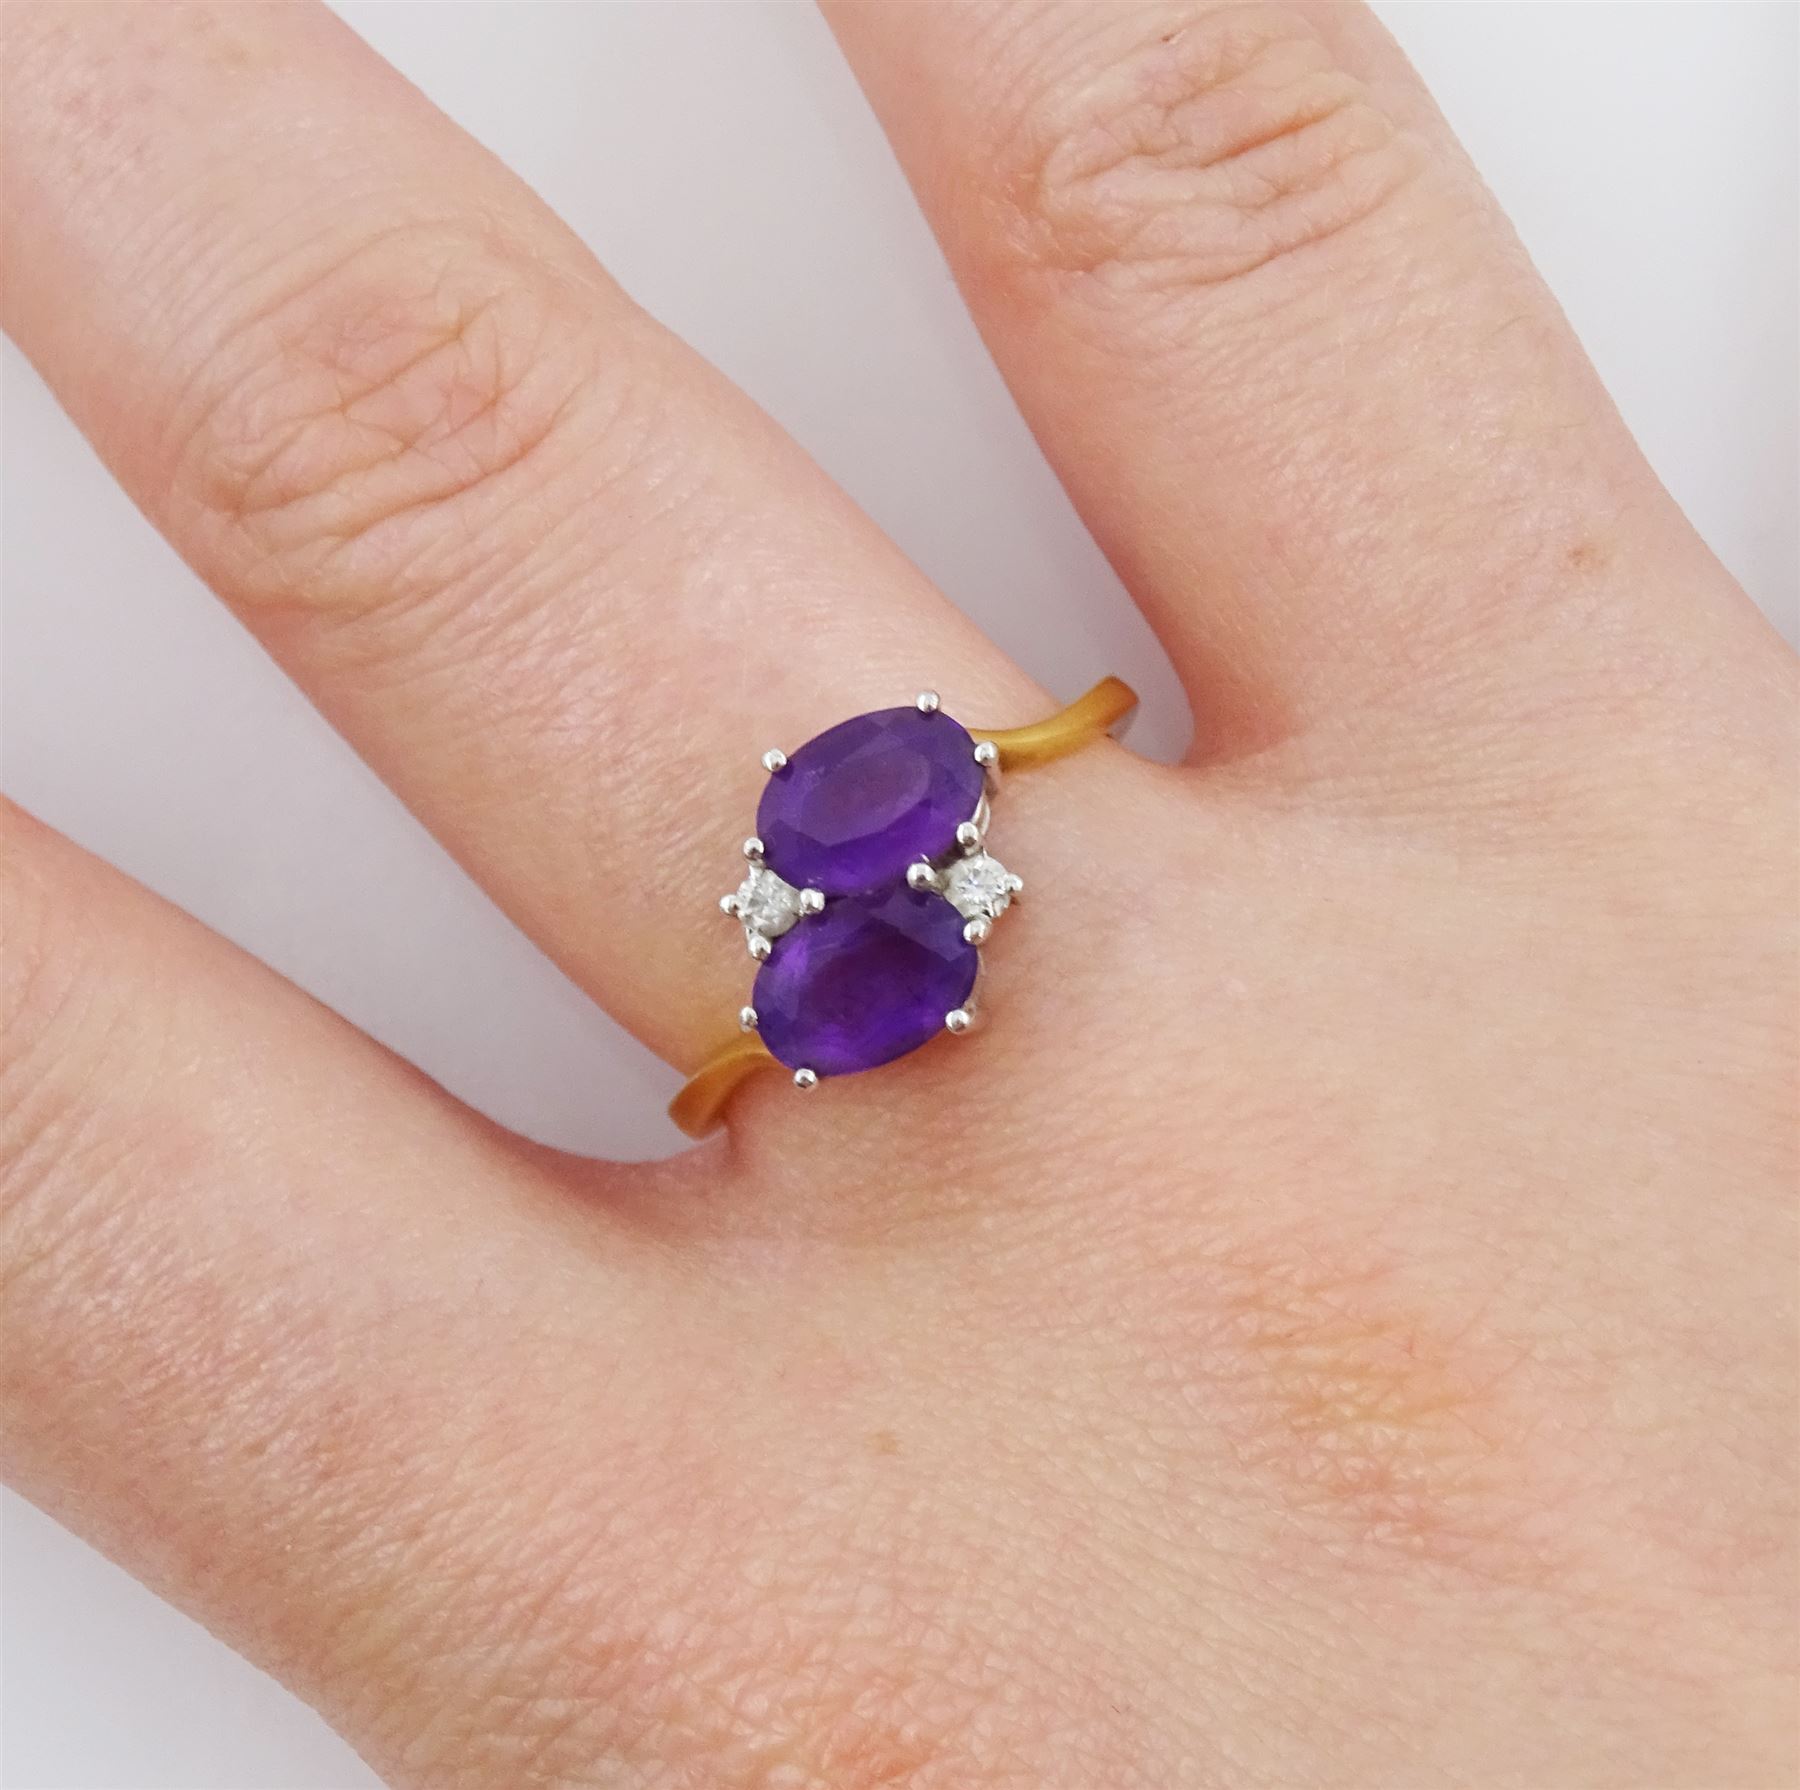 18ct gold four stone oval cut amethyst and round brilliant cut diamond ring - Image 2 of 4